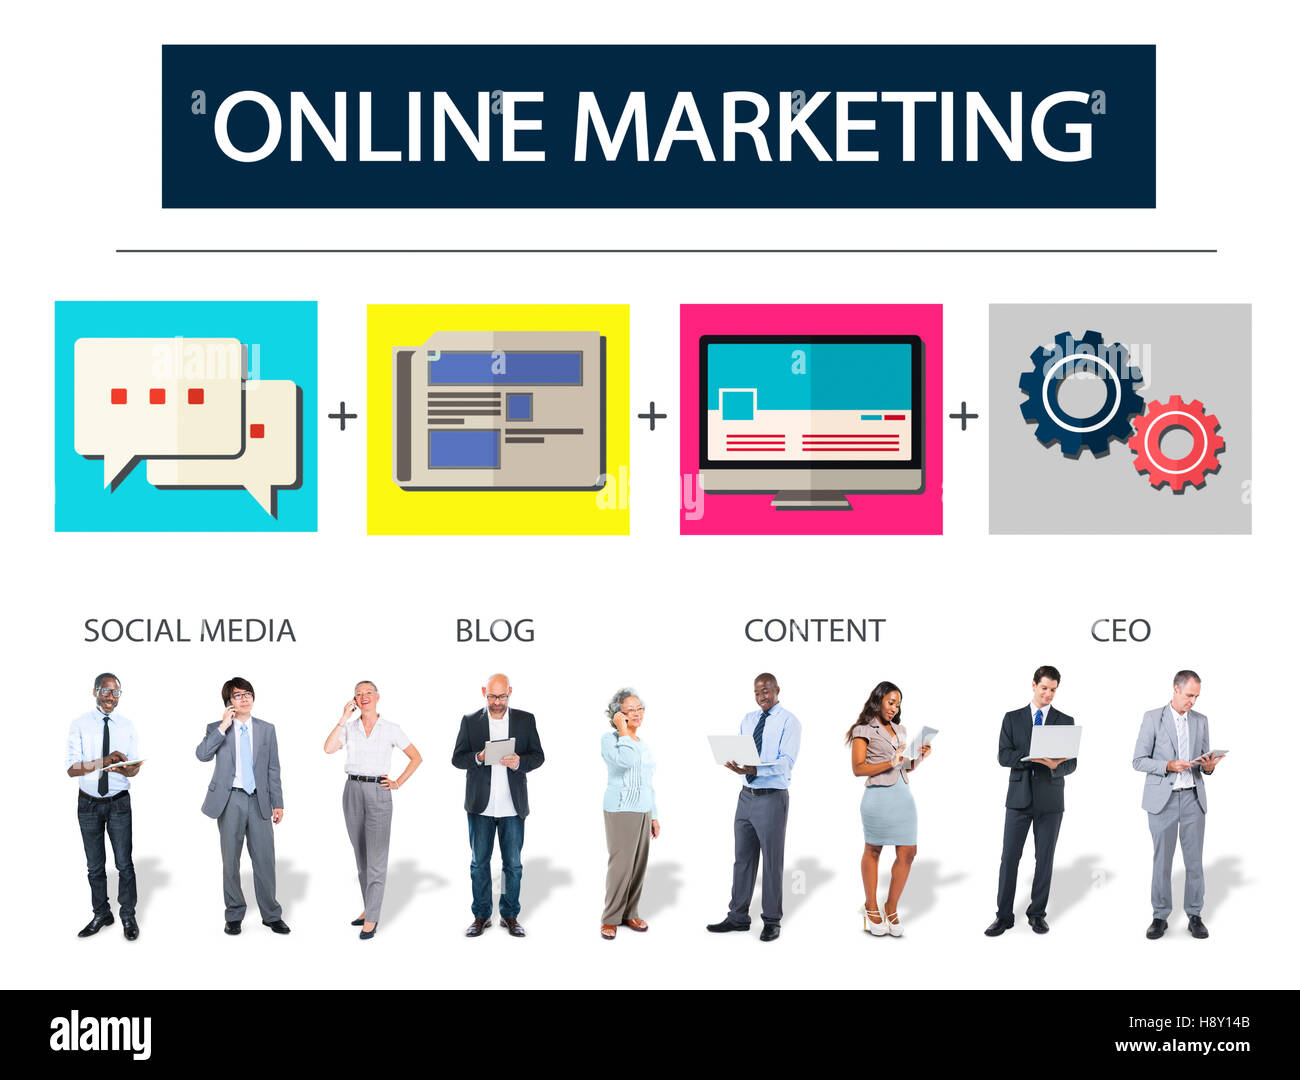 Online Marketing Business Content Strategy Target Concept Stock Photo